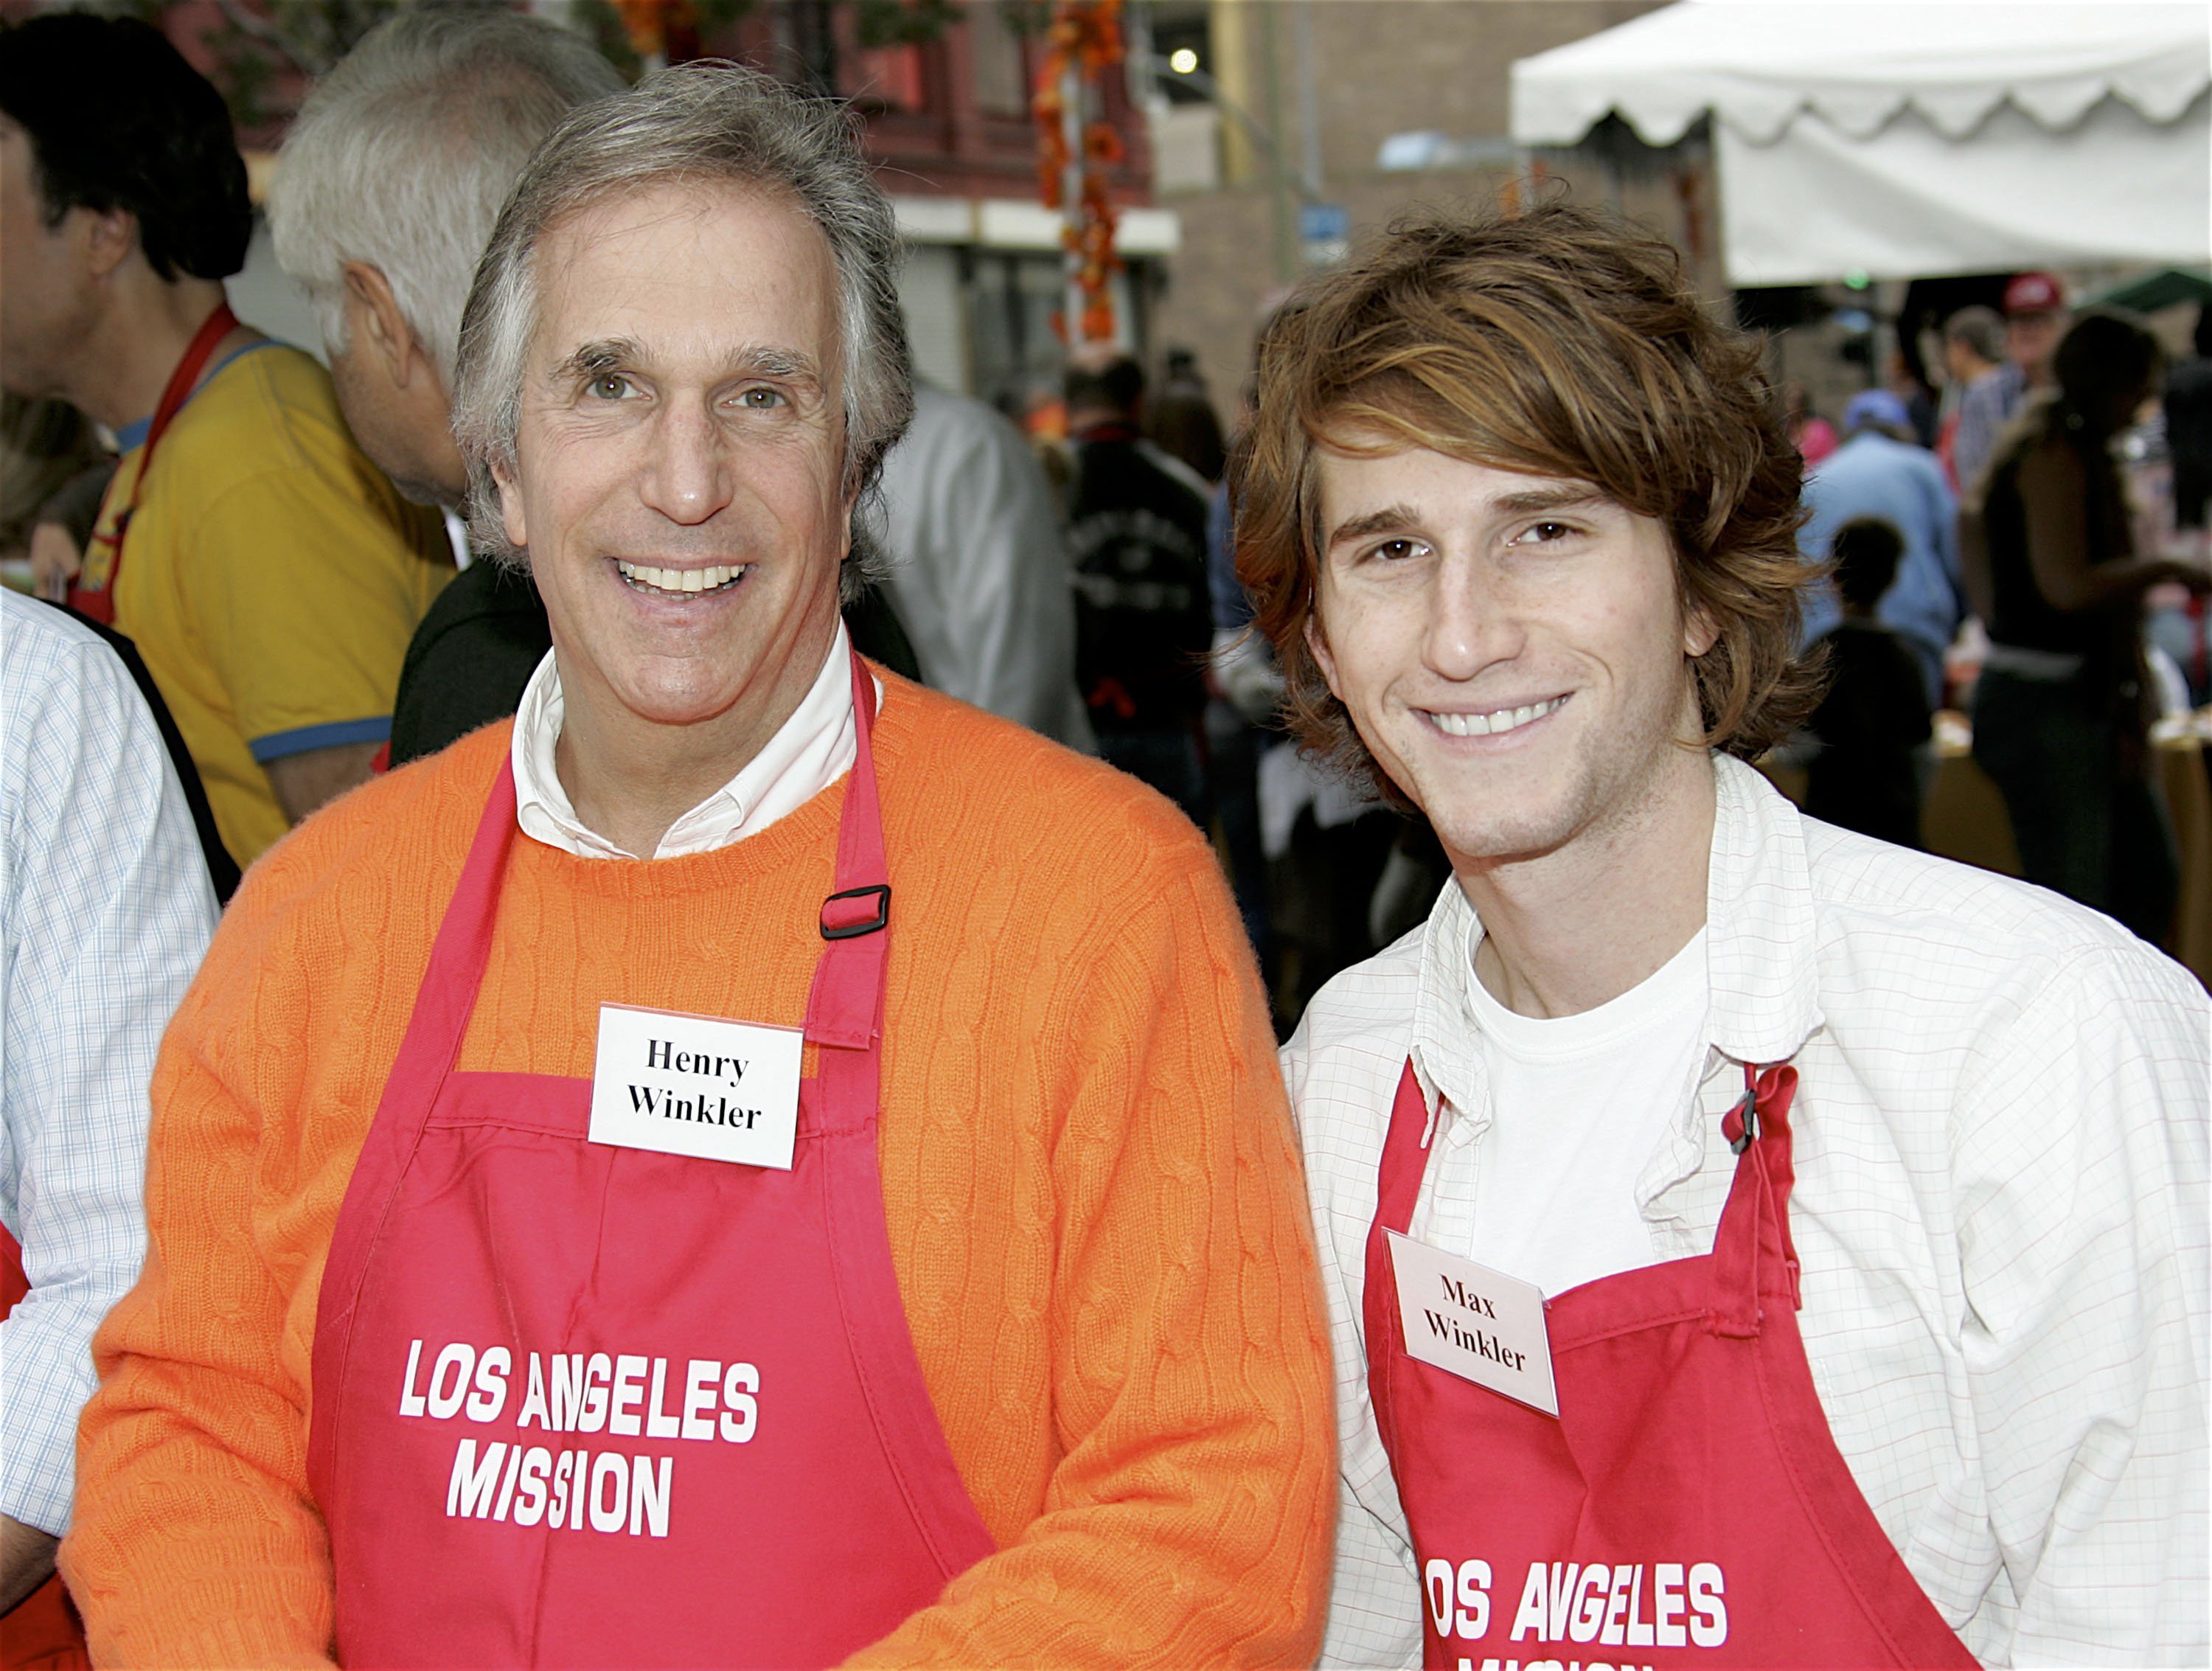 Henry Winkler and his son Max Winkler at 2004's Thanksgiving Meal for the Homeless at Los Angeles Mission | Photo: Getty Images